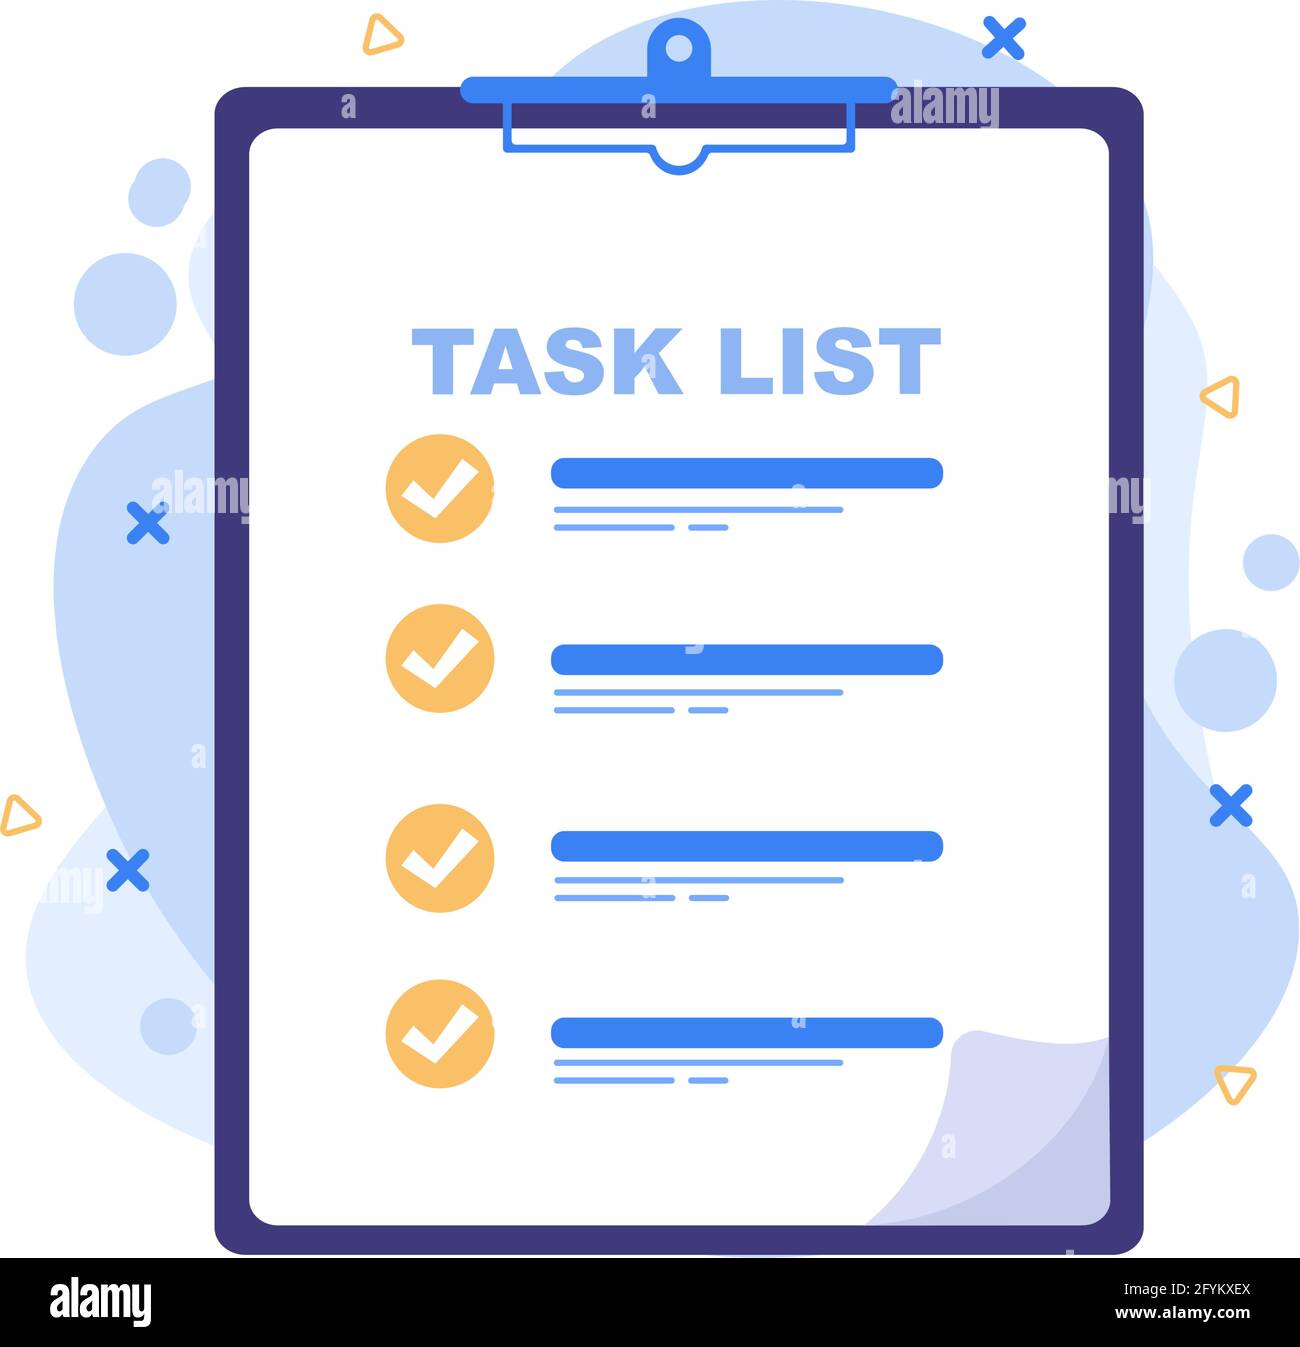 Task List Vector Illustration To Do list Time Management, Work Planning or  Organization of Daily Goals. Landing Page Template Stock Vector Image & Art  - Alamy